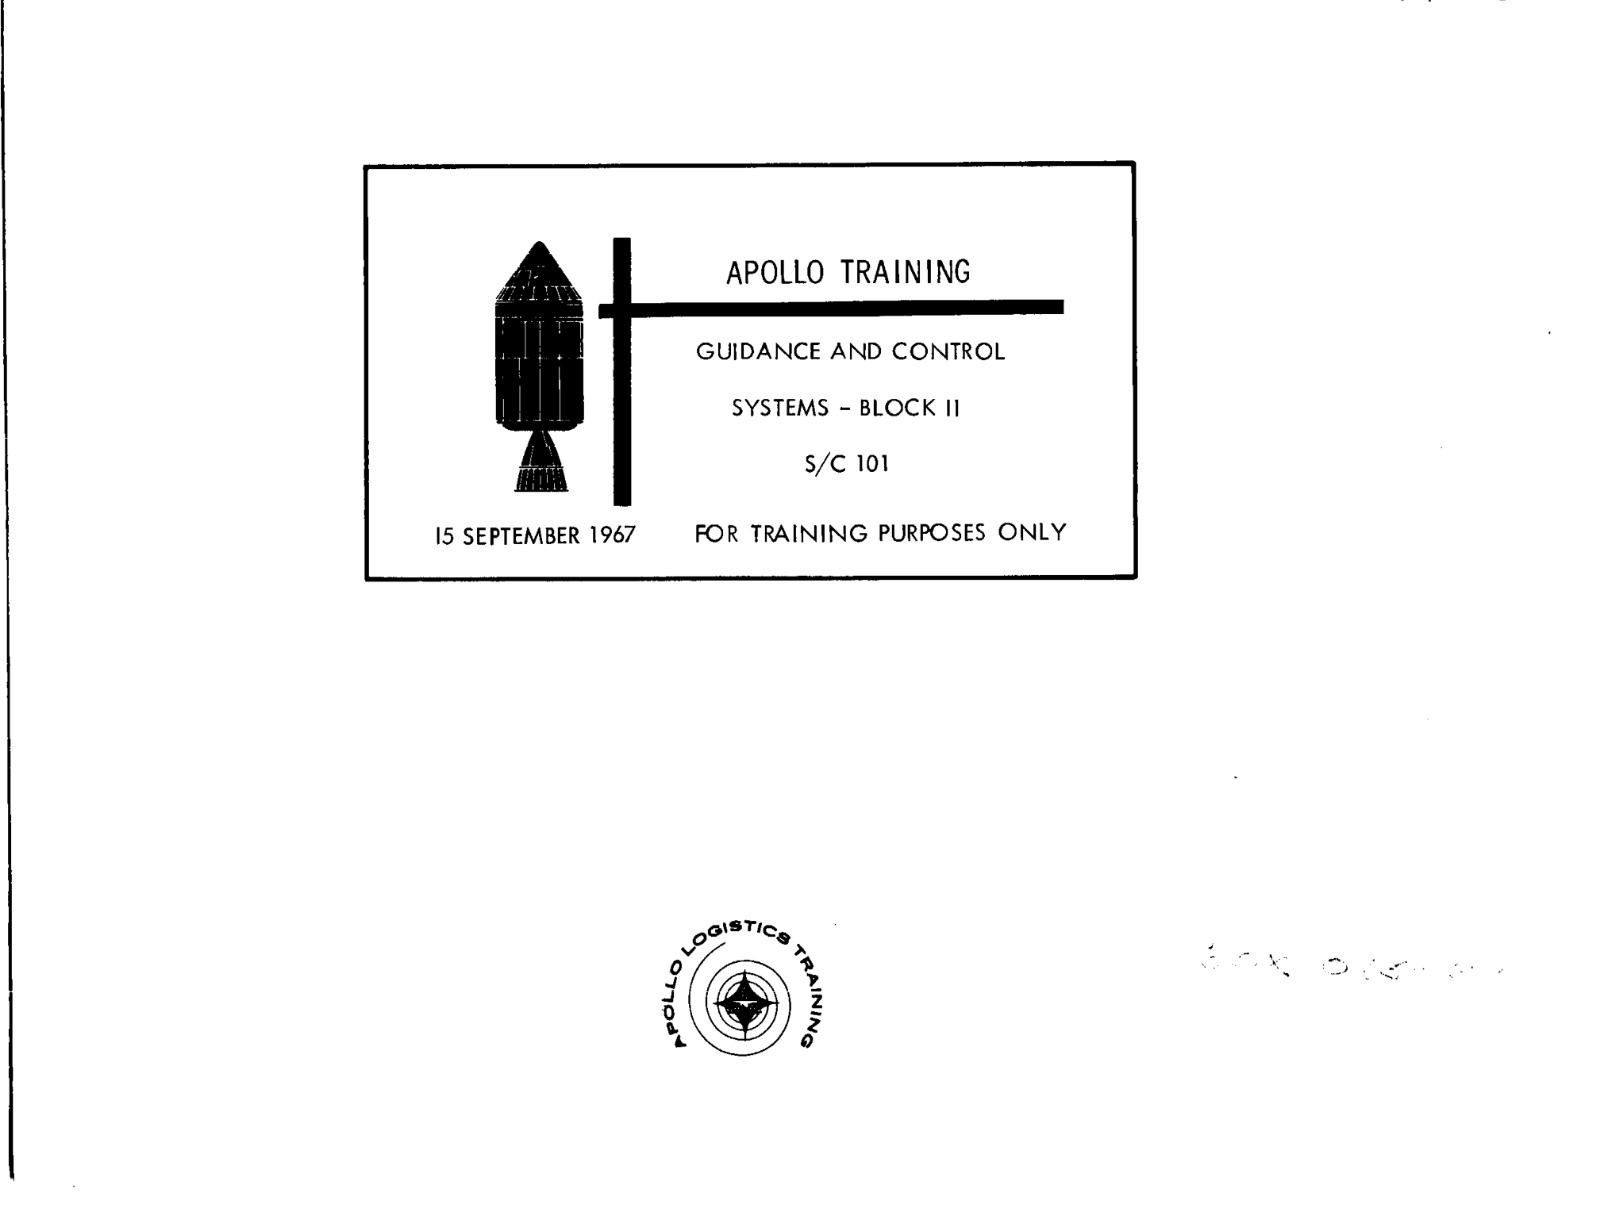 148 Page 1967 NASA APOLLO GUIDANCE CONTROL S/C 101 Systems Training Manual on CD